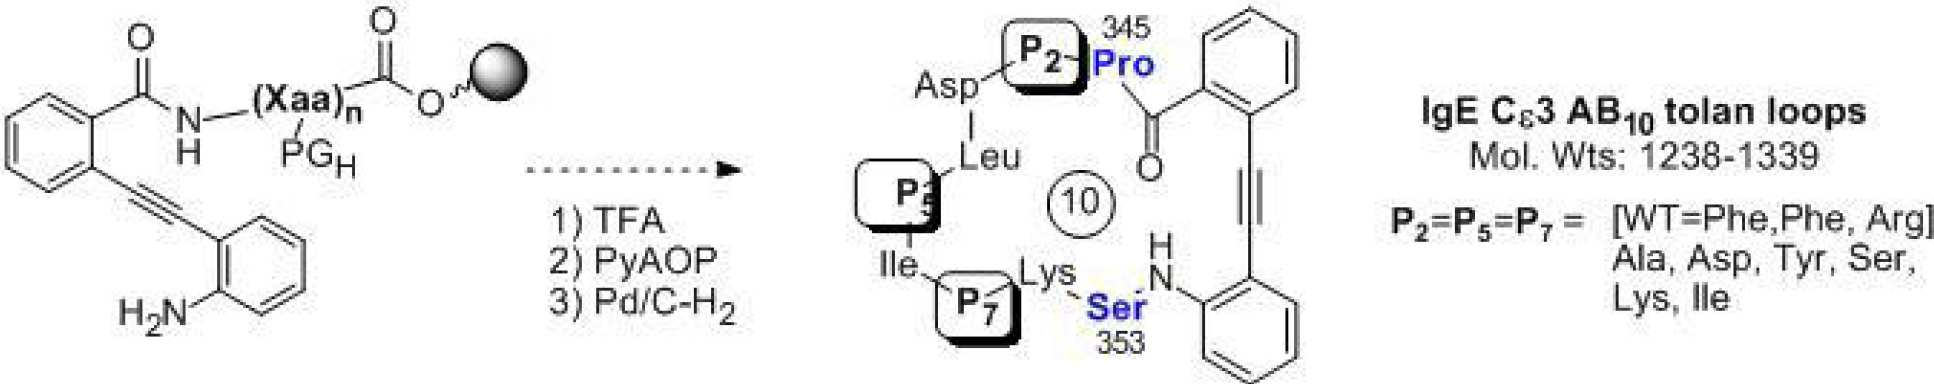 One of our approaches to peptoid synthesis